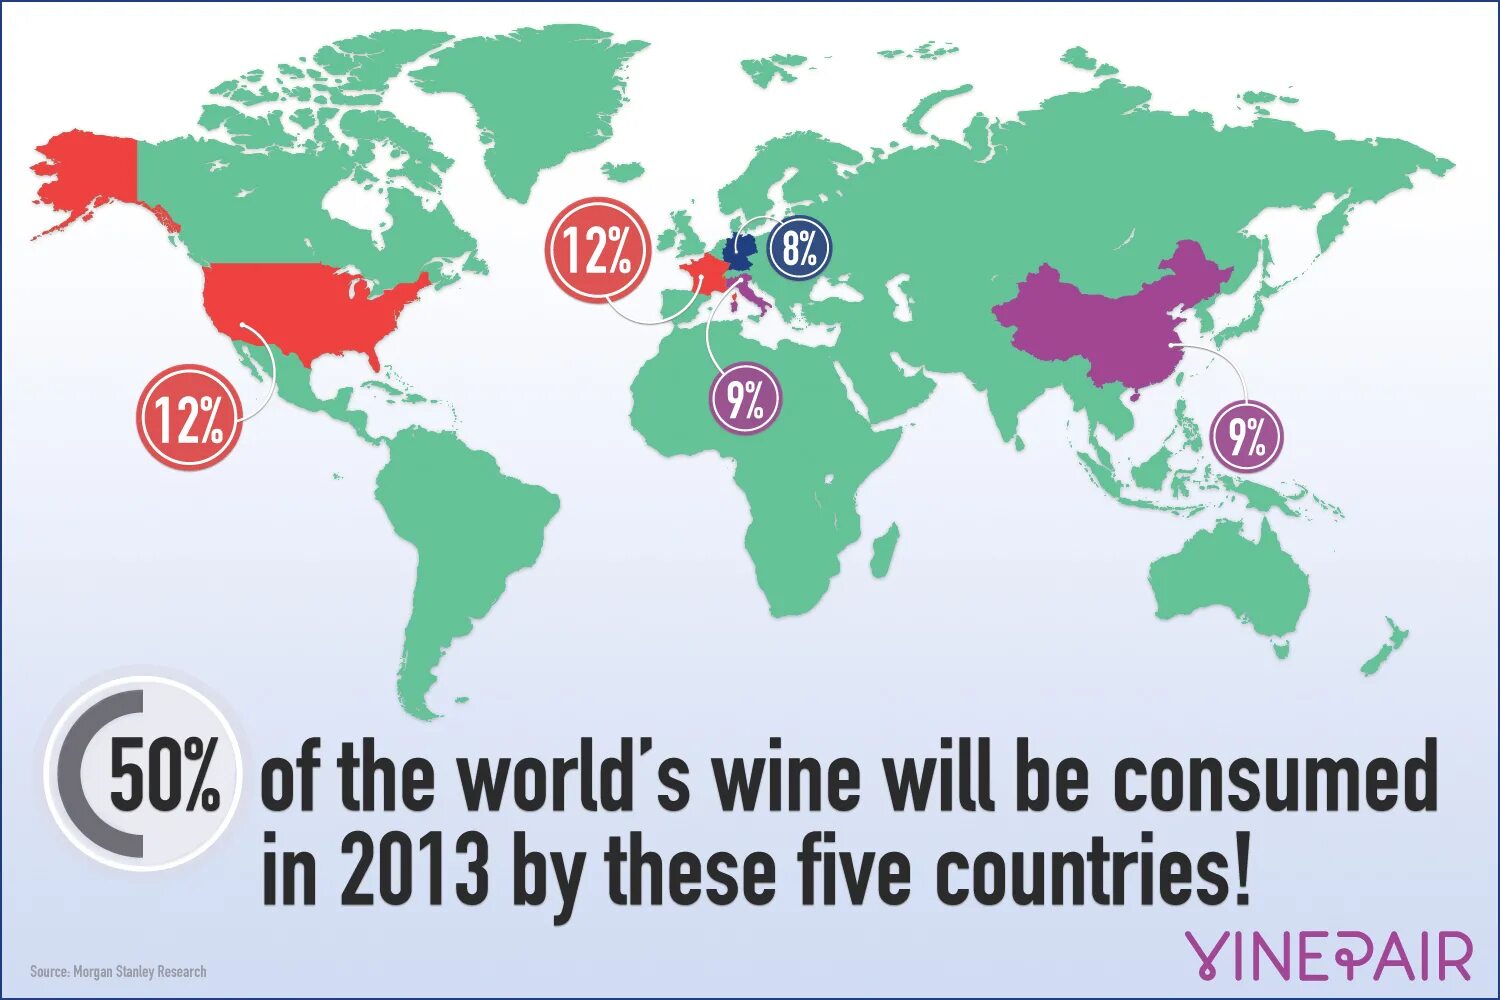 Drinking countries. Big Five Countries. 5 Countries. Big 5 Countries. World Map of Wine consumption.